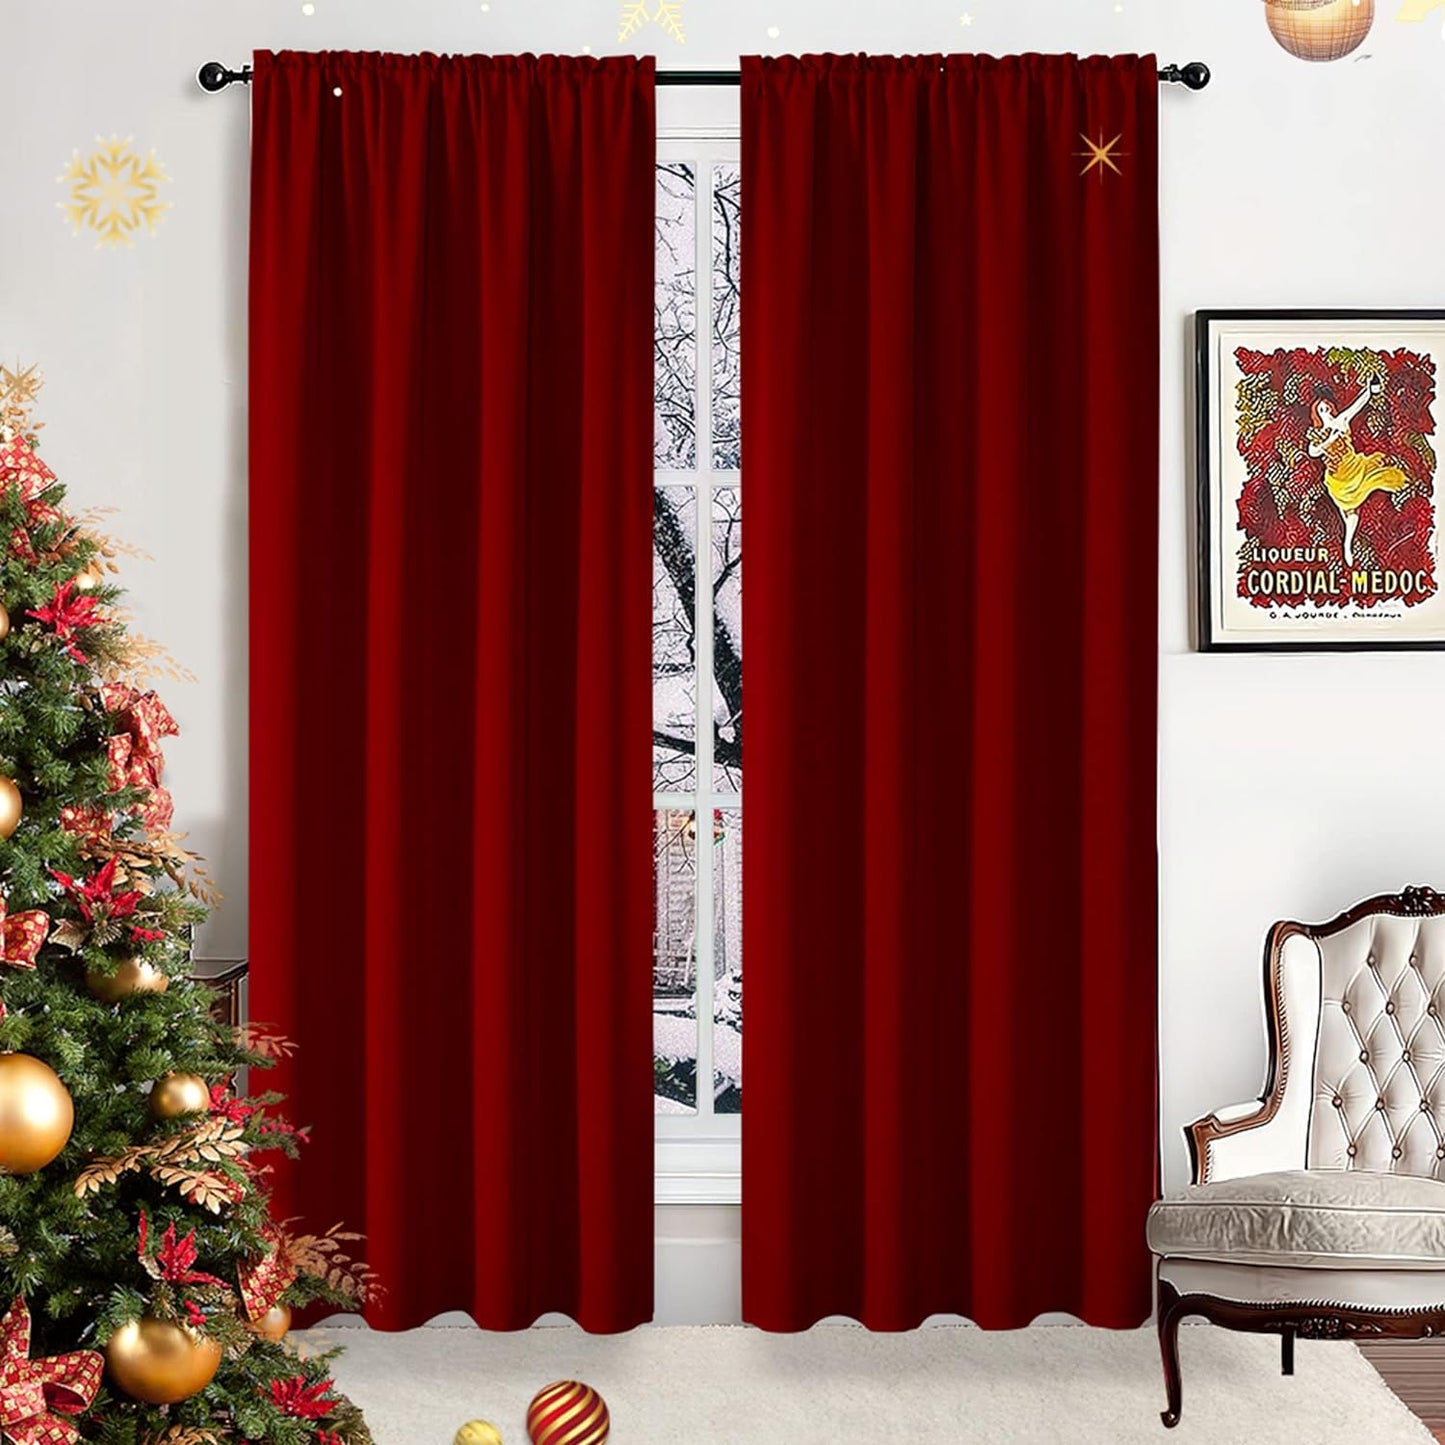 CUCRAF Blackout Curtains 84 Inches Long for Living Room, Light Beige Room Darkening Window Curtain Panels, Rod Pocket Thermal Insulated Solid Drapes for Bedroom, 52X84 Inch, Set of 2 Panels  CUCRAF Maroon Red 52W X 95L Inch 2 Panels 